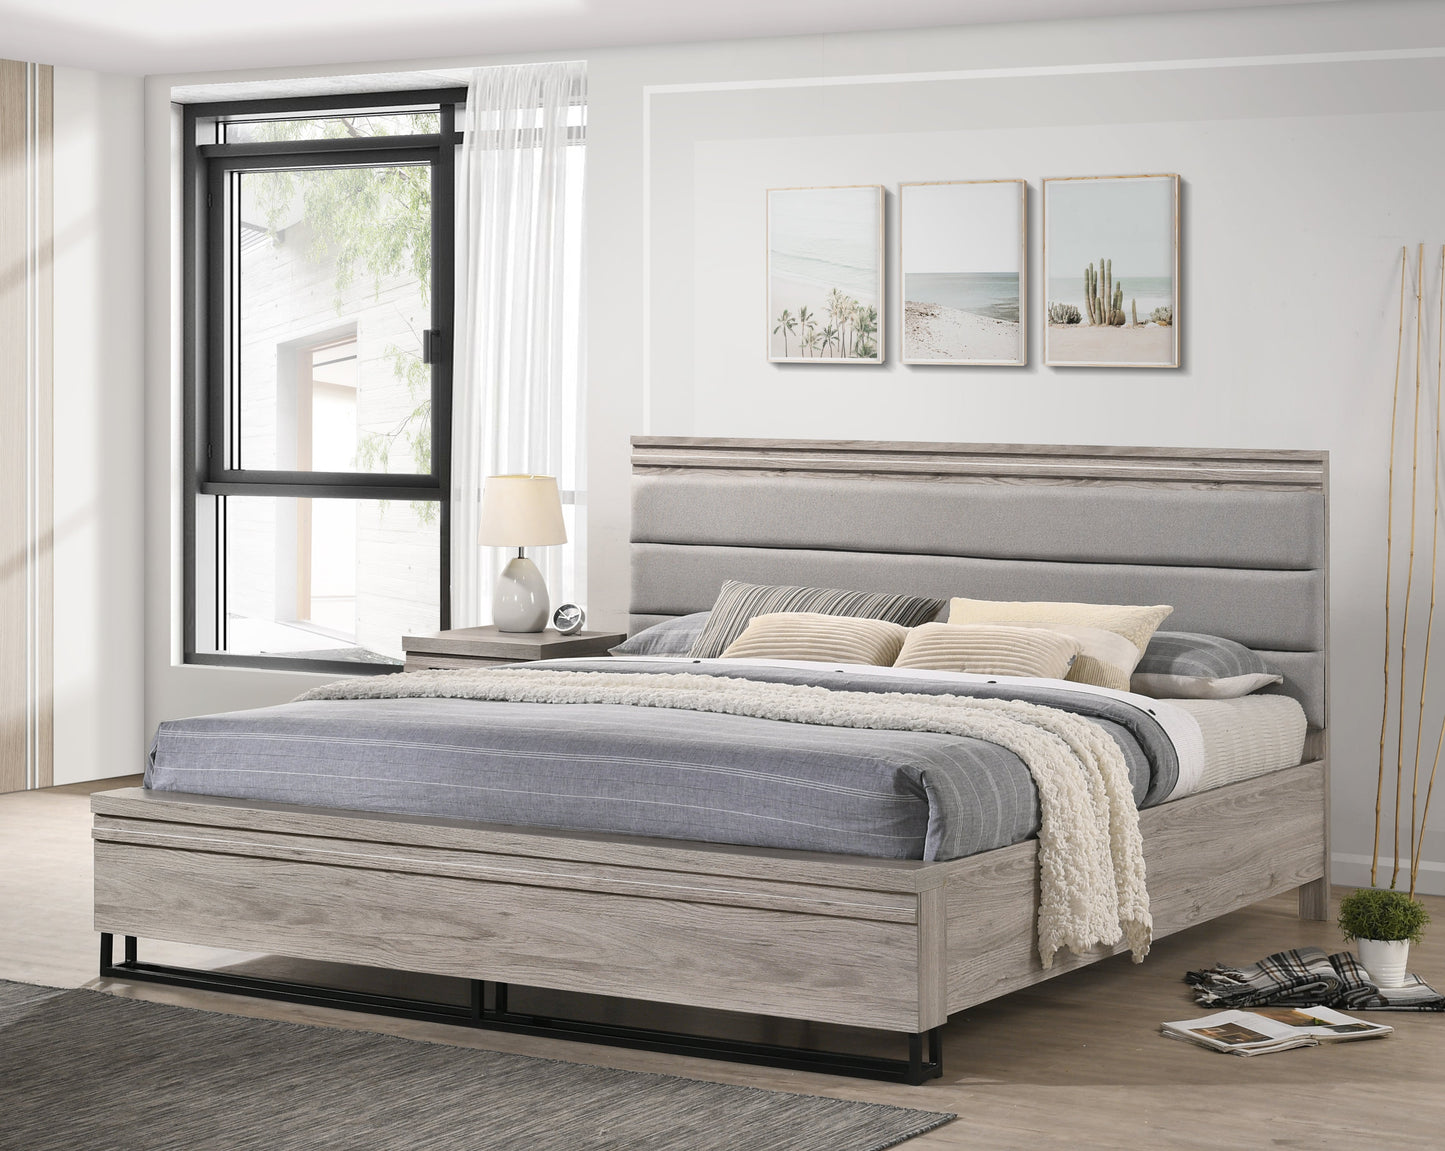 Alvear Upholstered Wood Wallbed Bed Collection with White LED Lights, Weathered Gray